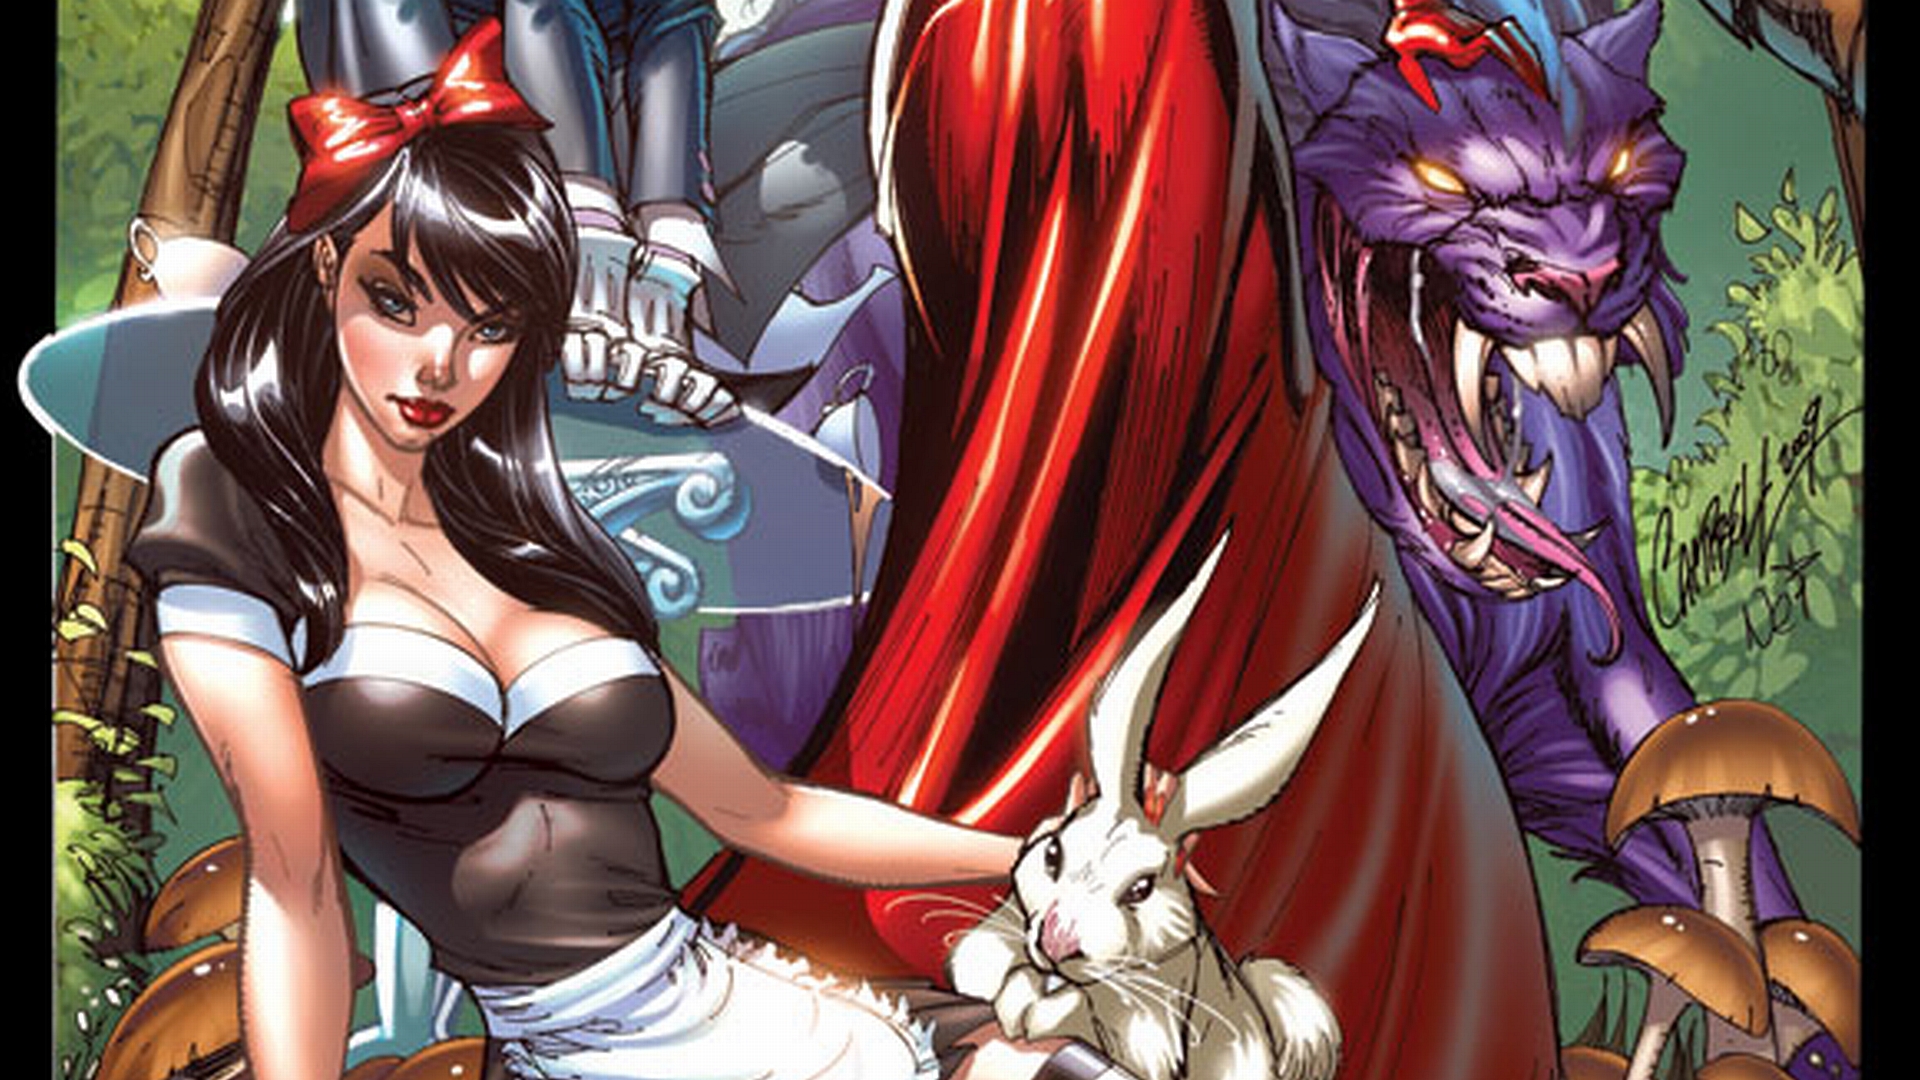 Grimm Fairy Tales Wonderland Of Cover A Cover Artist Emilio Laiso